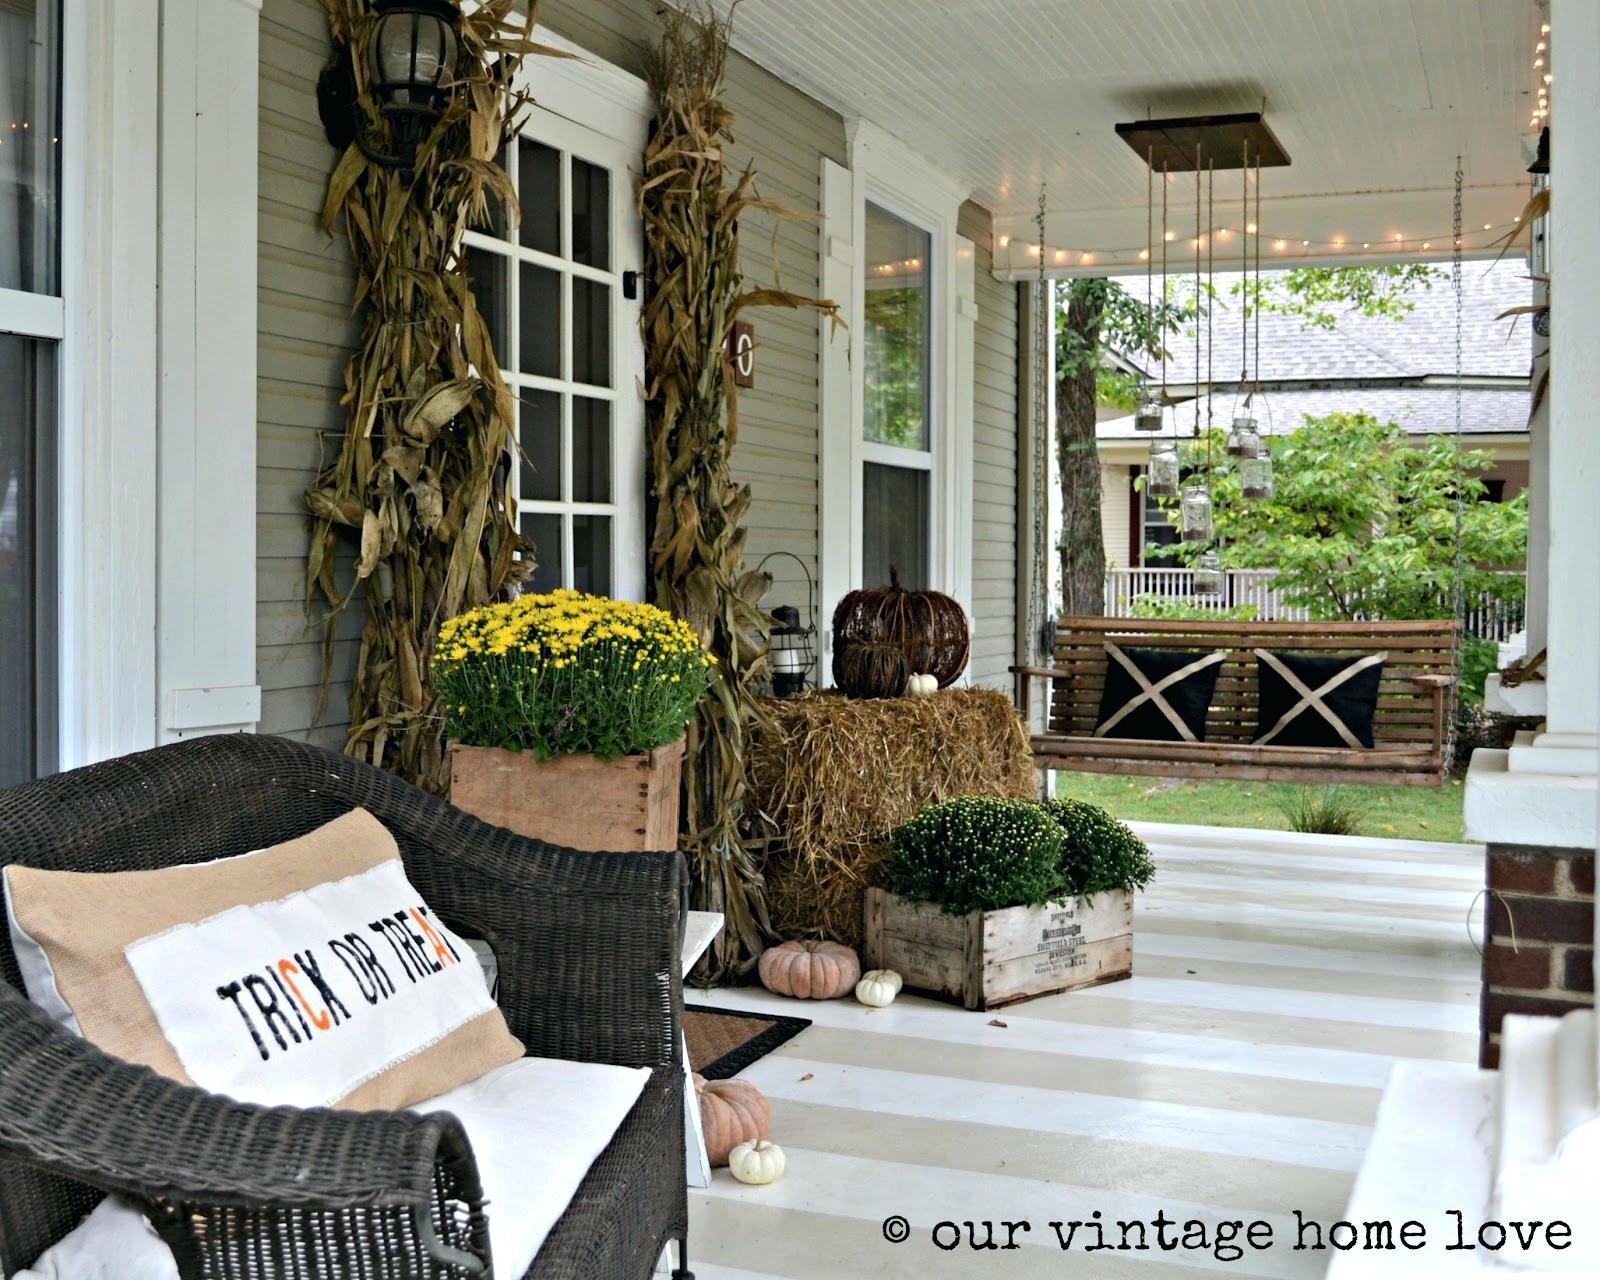 10 Trendy Porch Decorating Ideas For Summer porch amusing decorating front porch ideas decorating front outdoor 2022